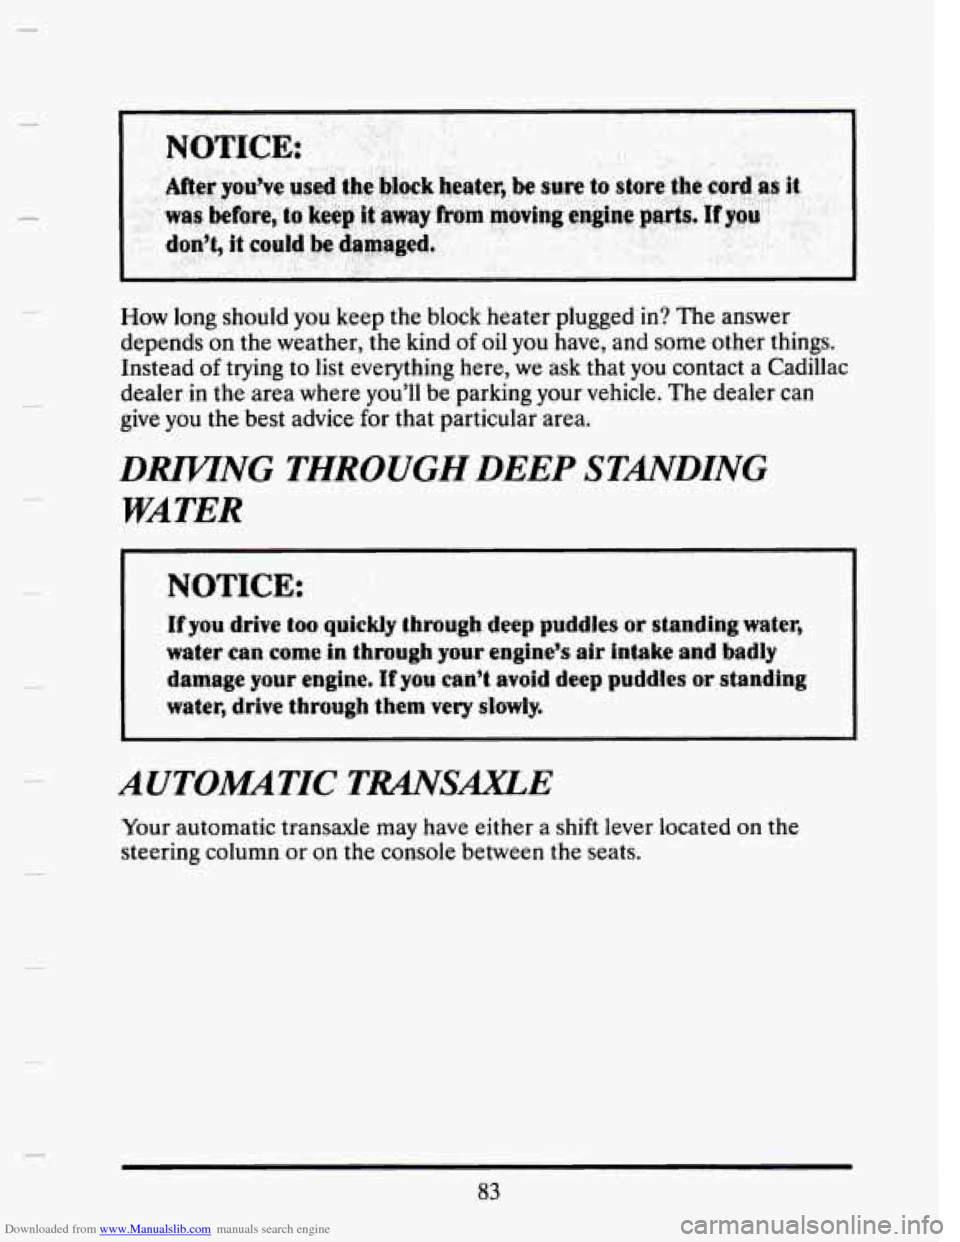 CADILLAC SEVILLE 1993 4.G Owners Manual Downloaded from www.Manualslib.com manuals search engine How  long should you keep  the block  heater  plugged  in?  The answer 
depends  on  the weather,  the kind 
of oil you  have,  and  some  othe